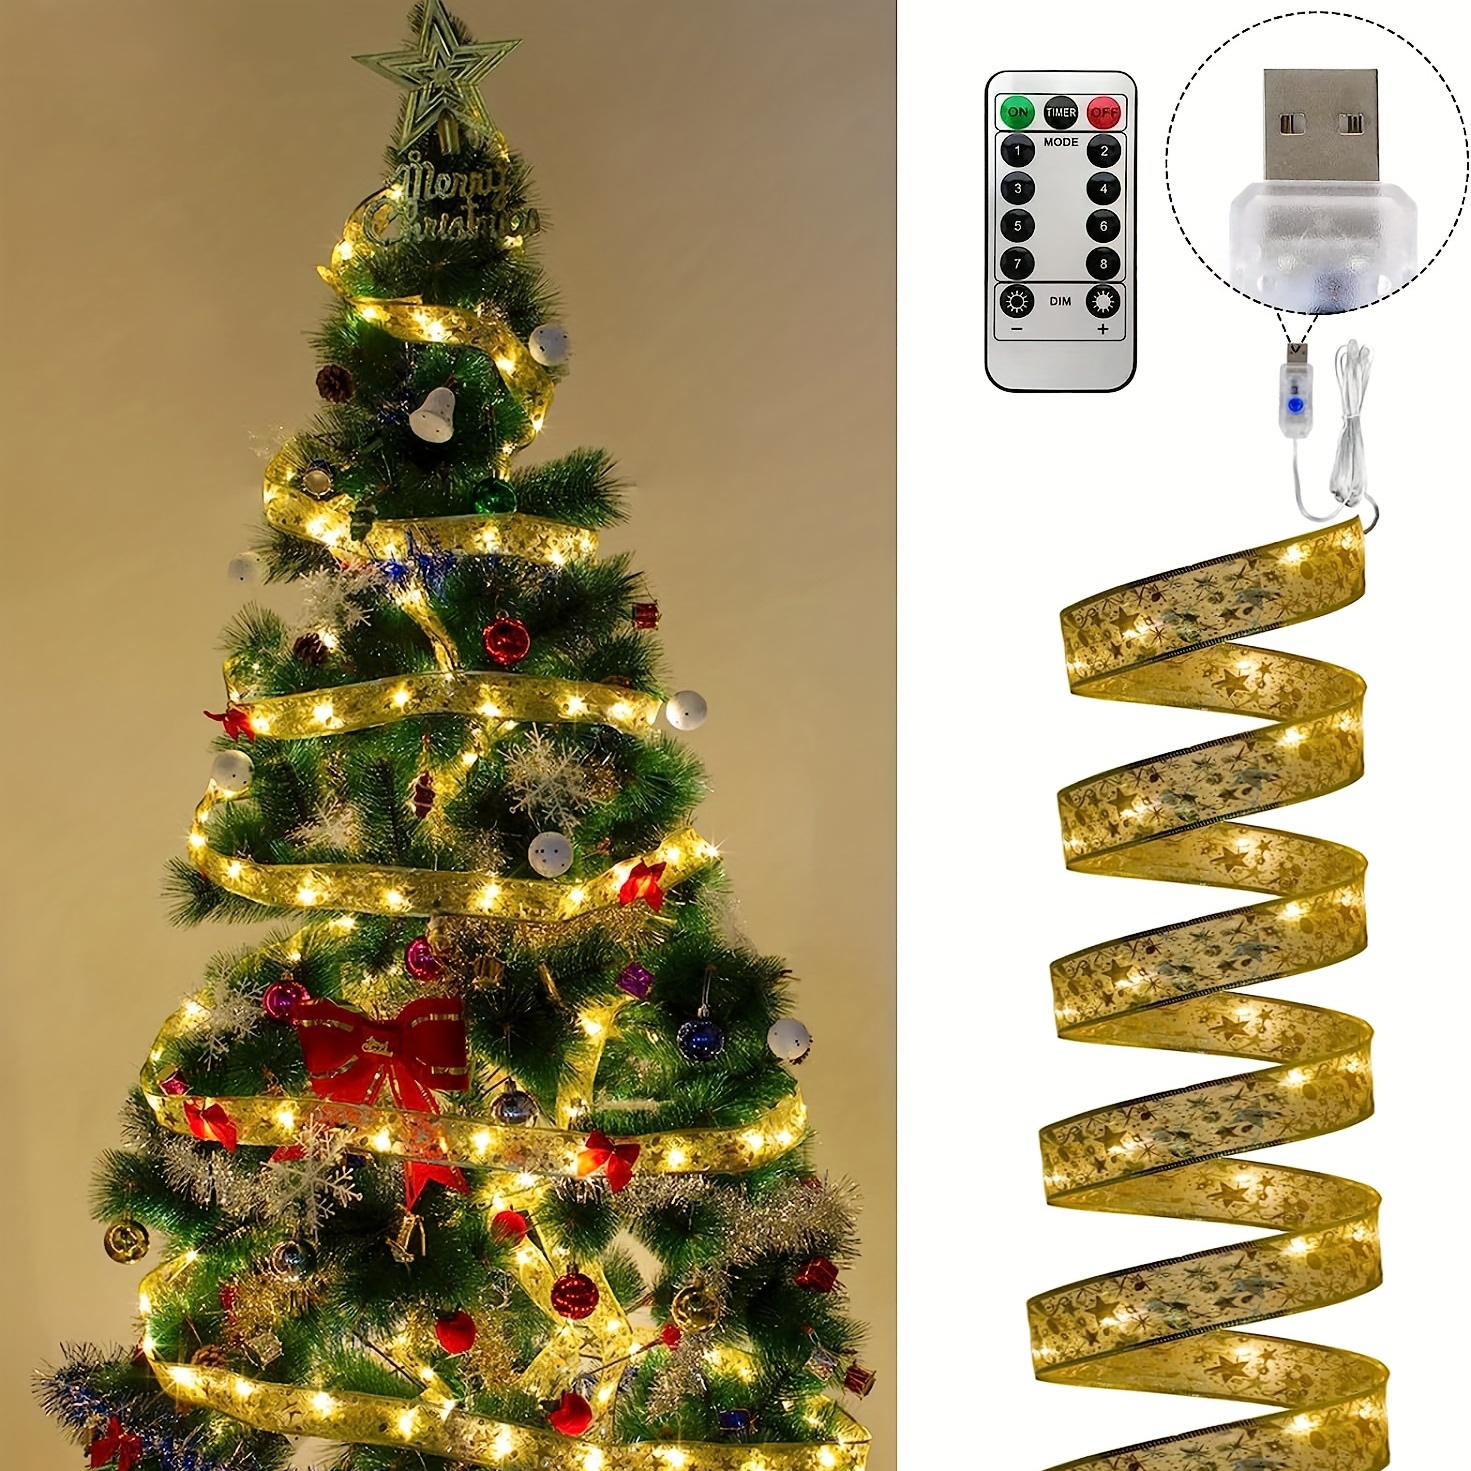 Christmas Ribbon Fairy Lights 32.8ft 100 LED Lights With Remote Control,8  Lights Modes USB Plug Powered Christmas Tree Ribbon Bows Fairy Strings  Lights For Weddings New Year Christmas Decorations White Lights  (32.8/16.4/3.28ft)